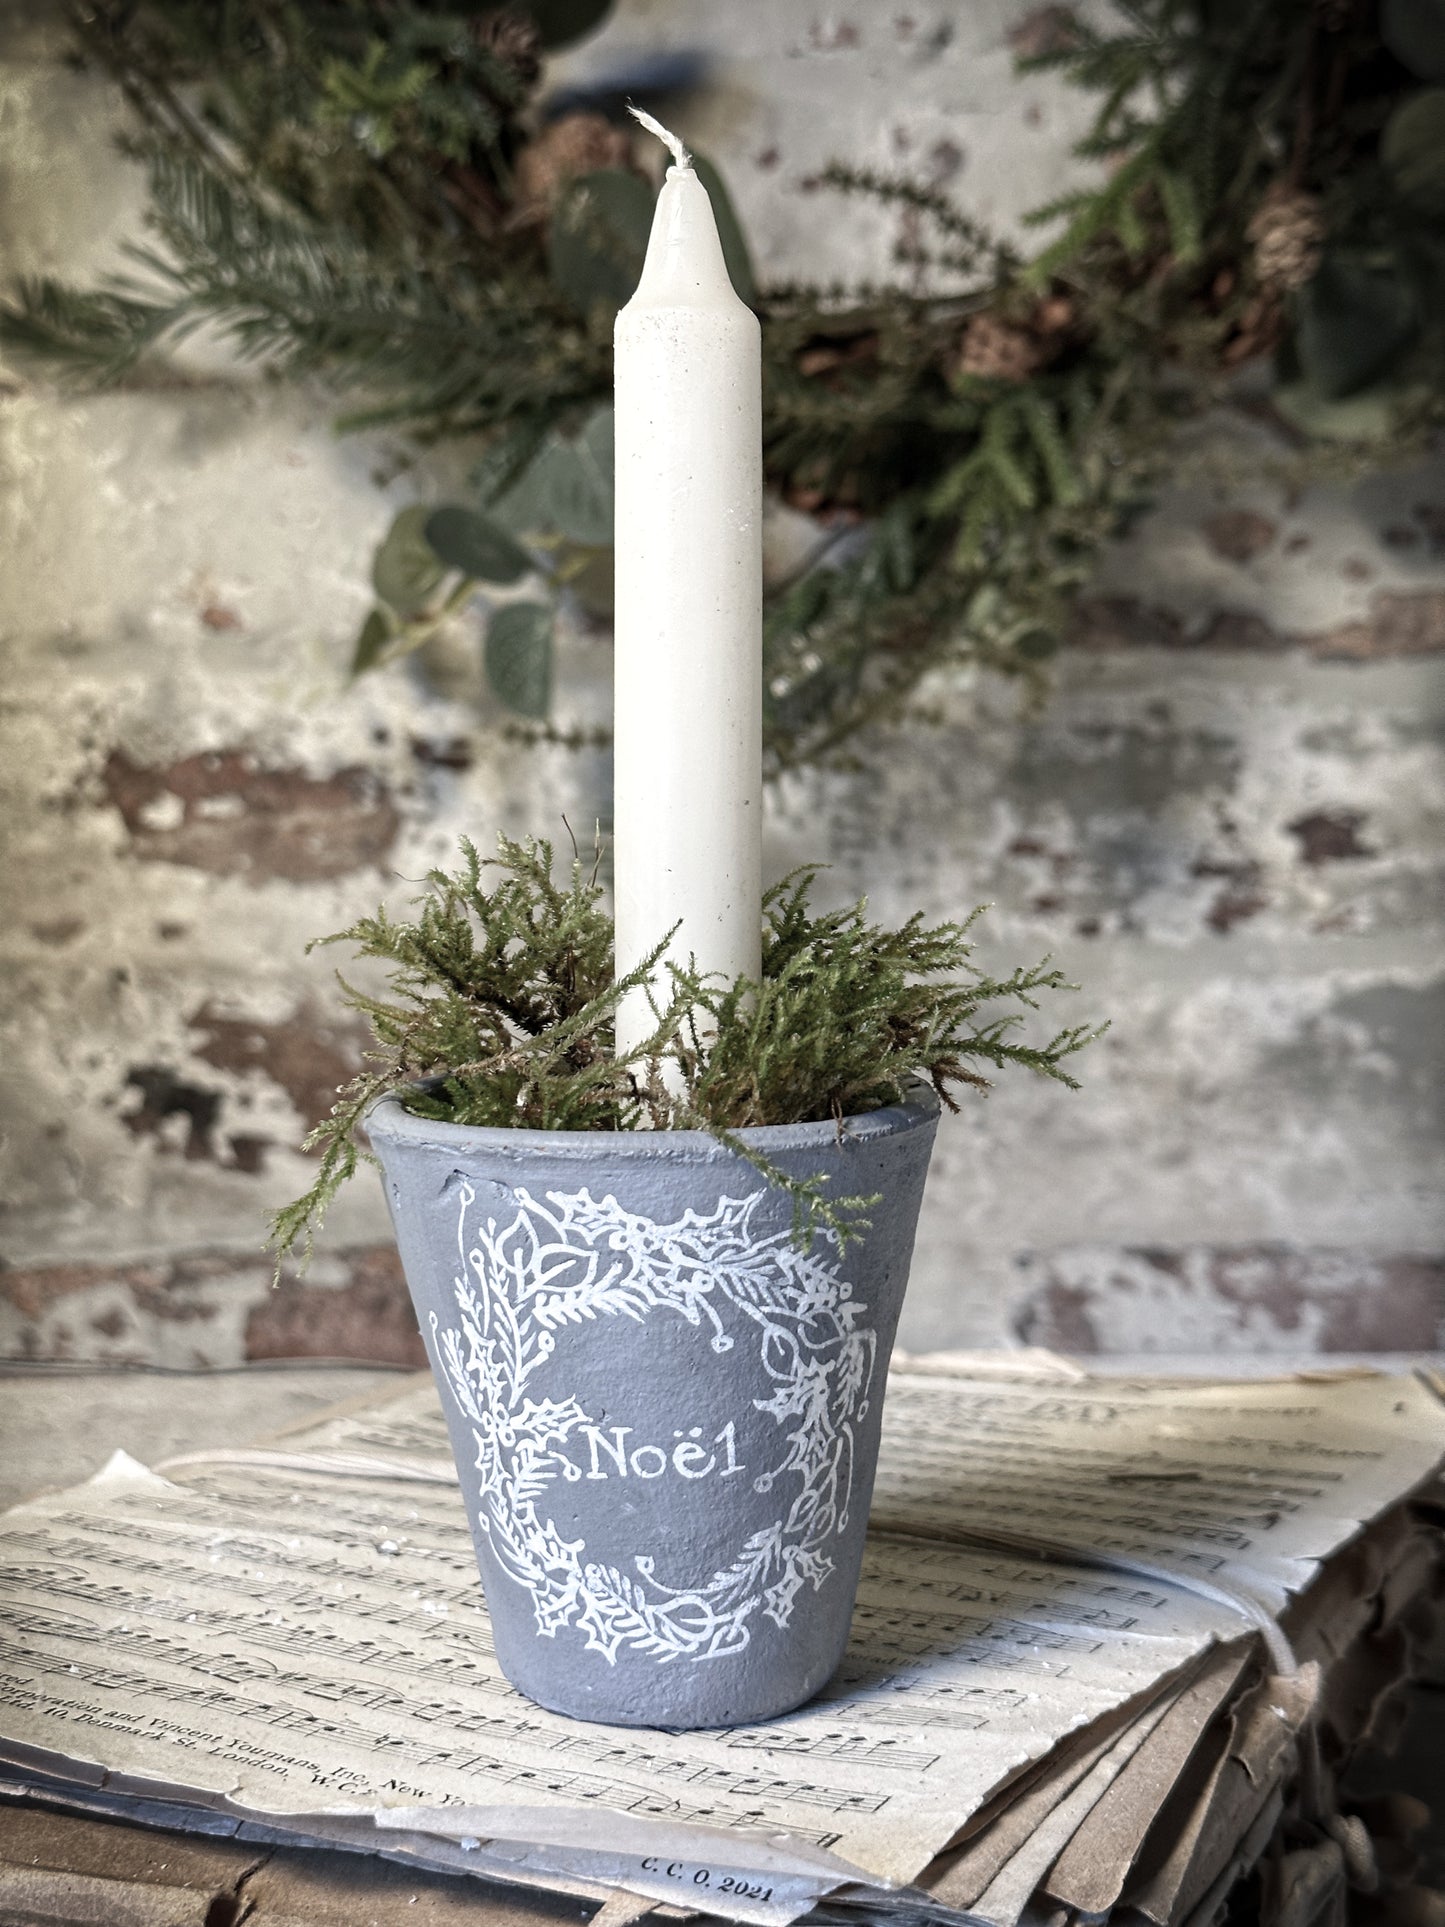 A small illustrated Victorian Christmas terracotta pot